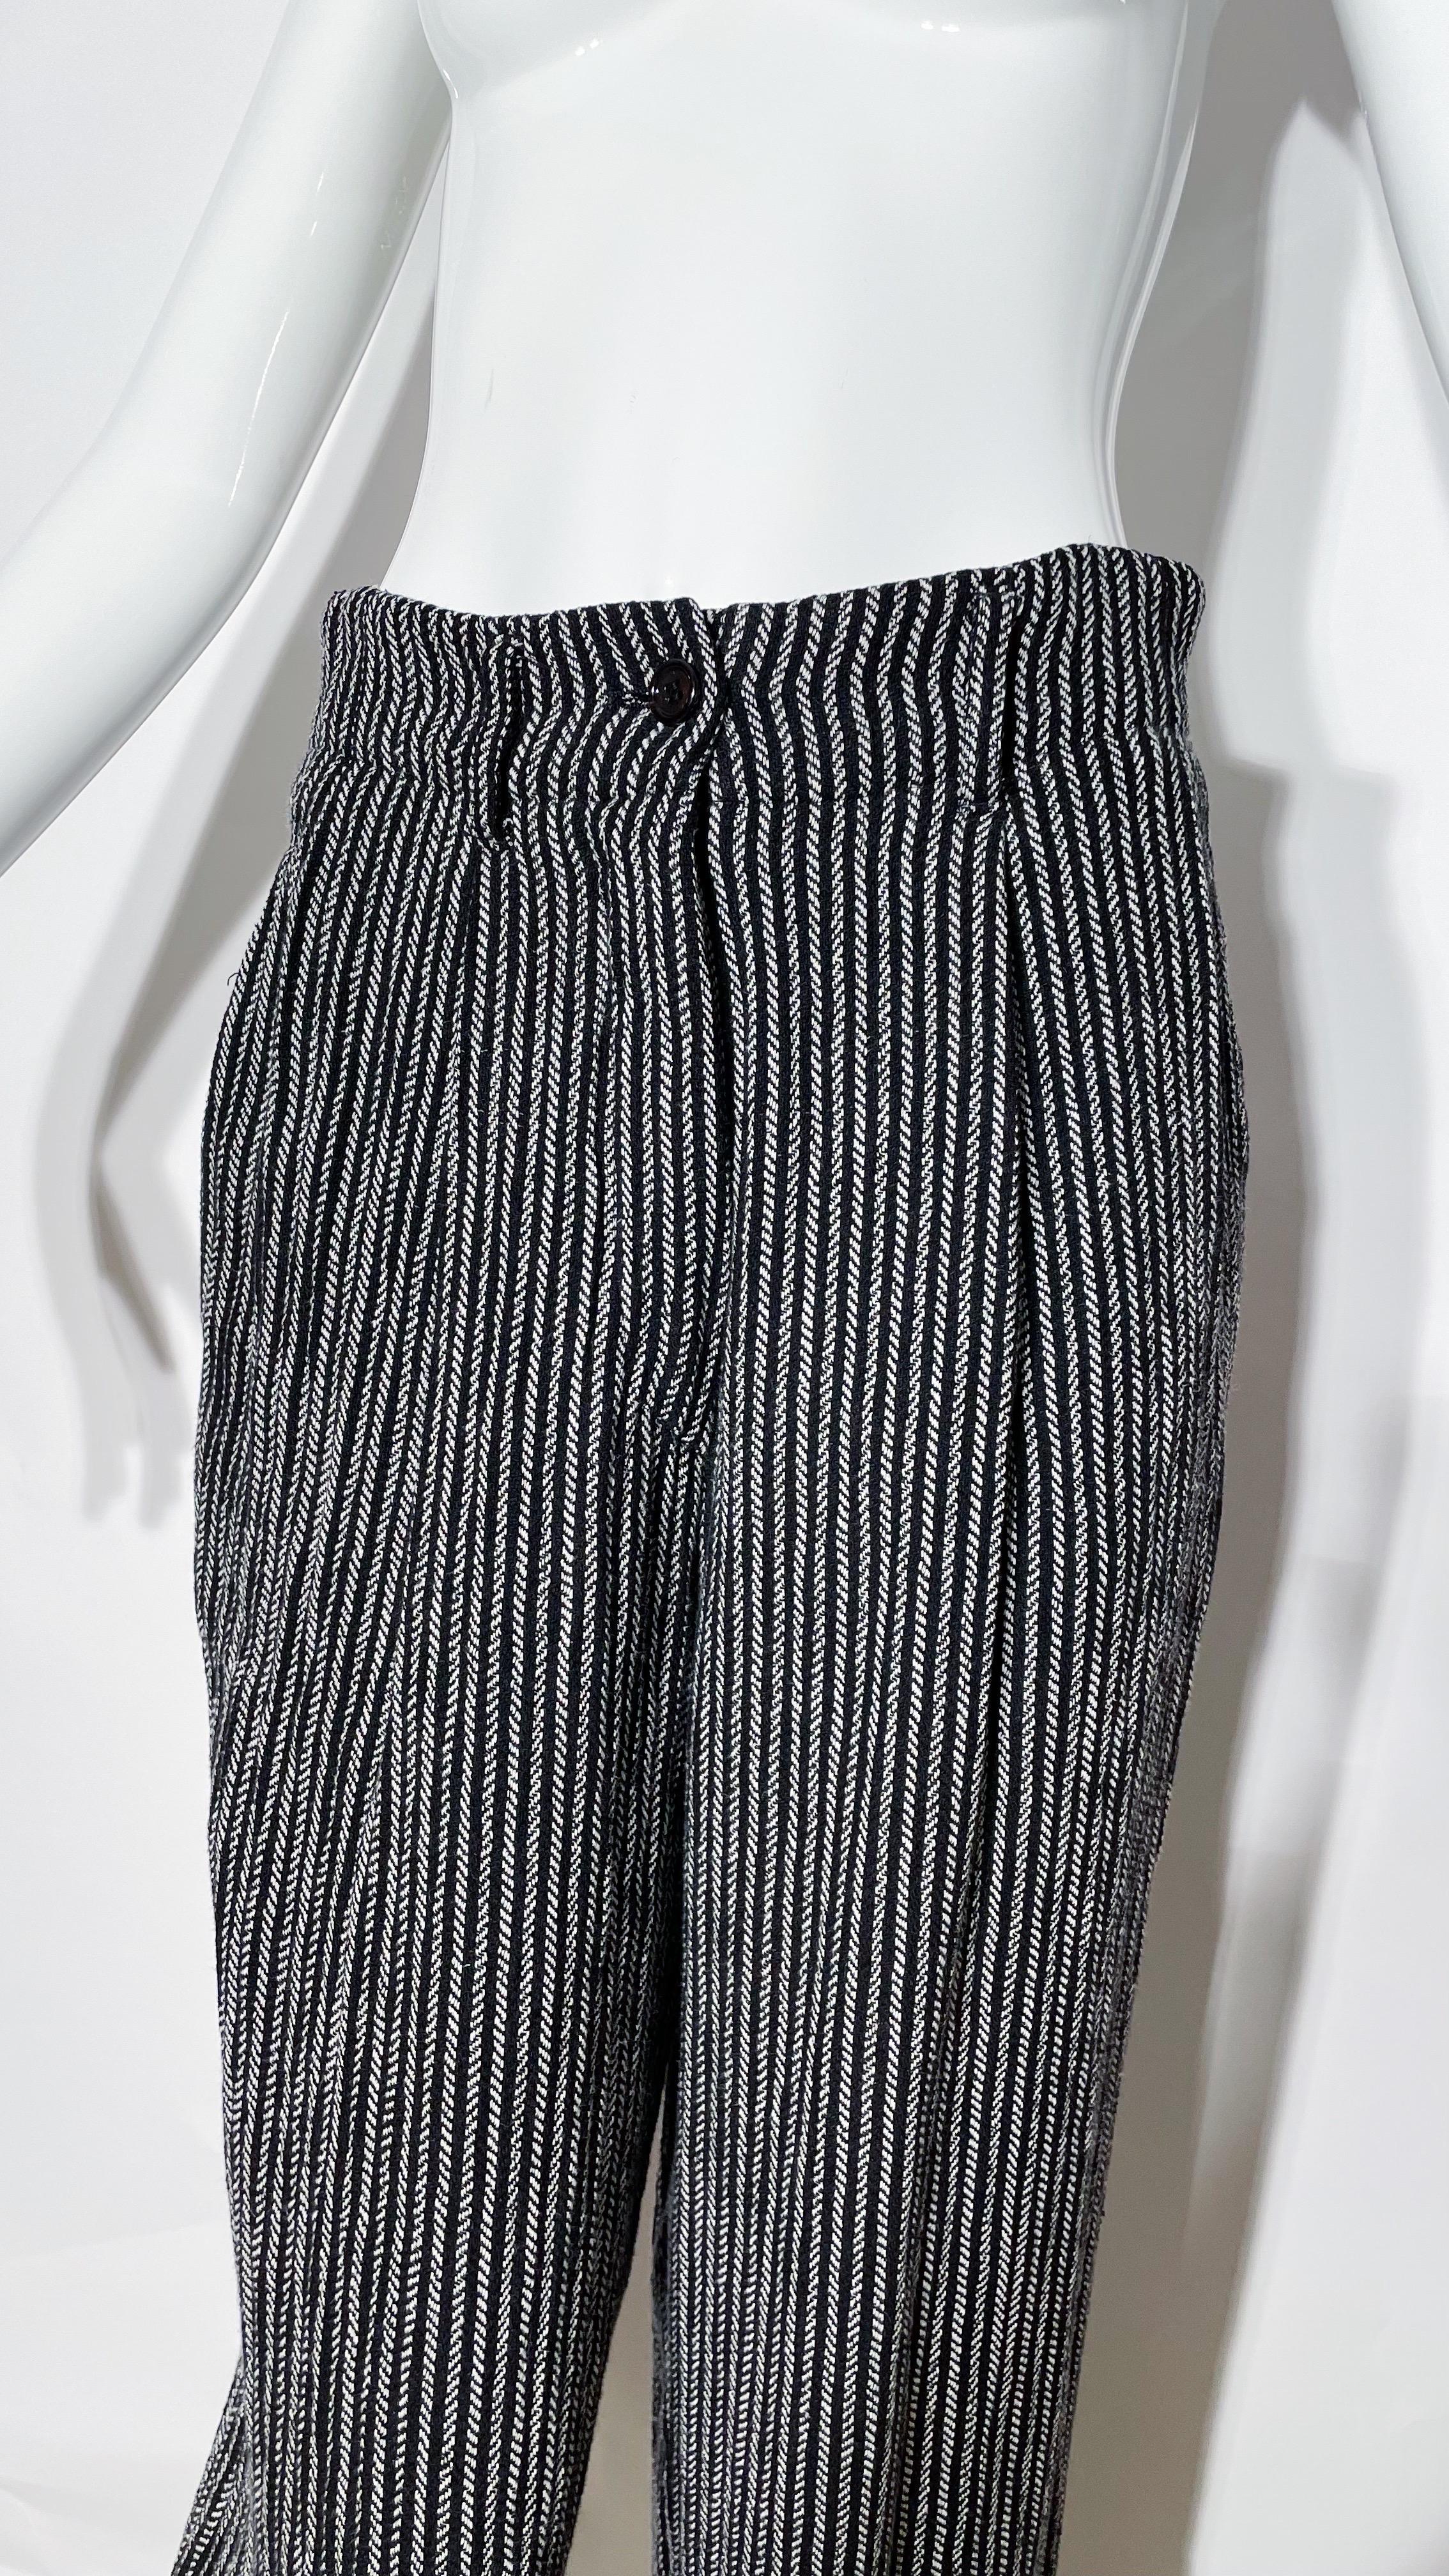 Stripe linen pants. Heavyweight. Front pockets. Front zipper closure. Rear pockets. Cropped tapered fit. Made in Italy. 
*Condition: excellent vintage condition. No visible flaws.

Measurements Taken Laying Flat (inches)—
Waist: 27 in.
Hip: 34